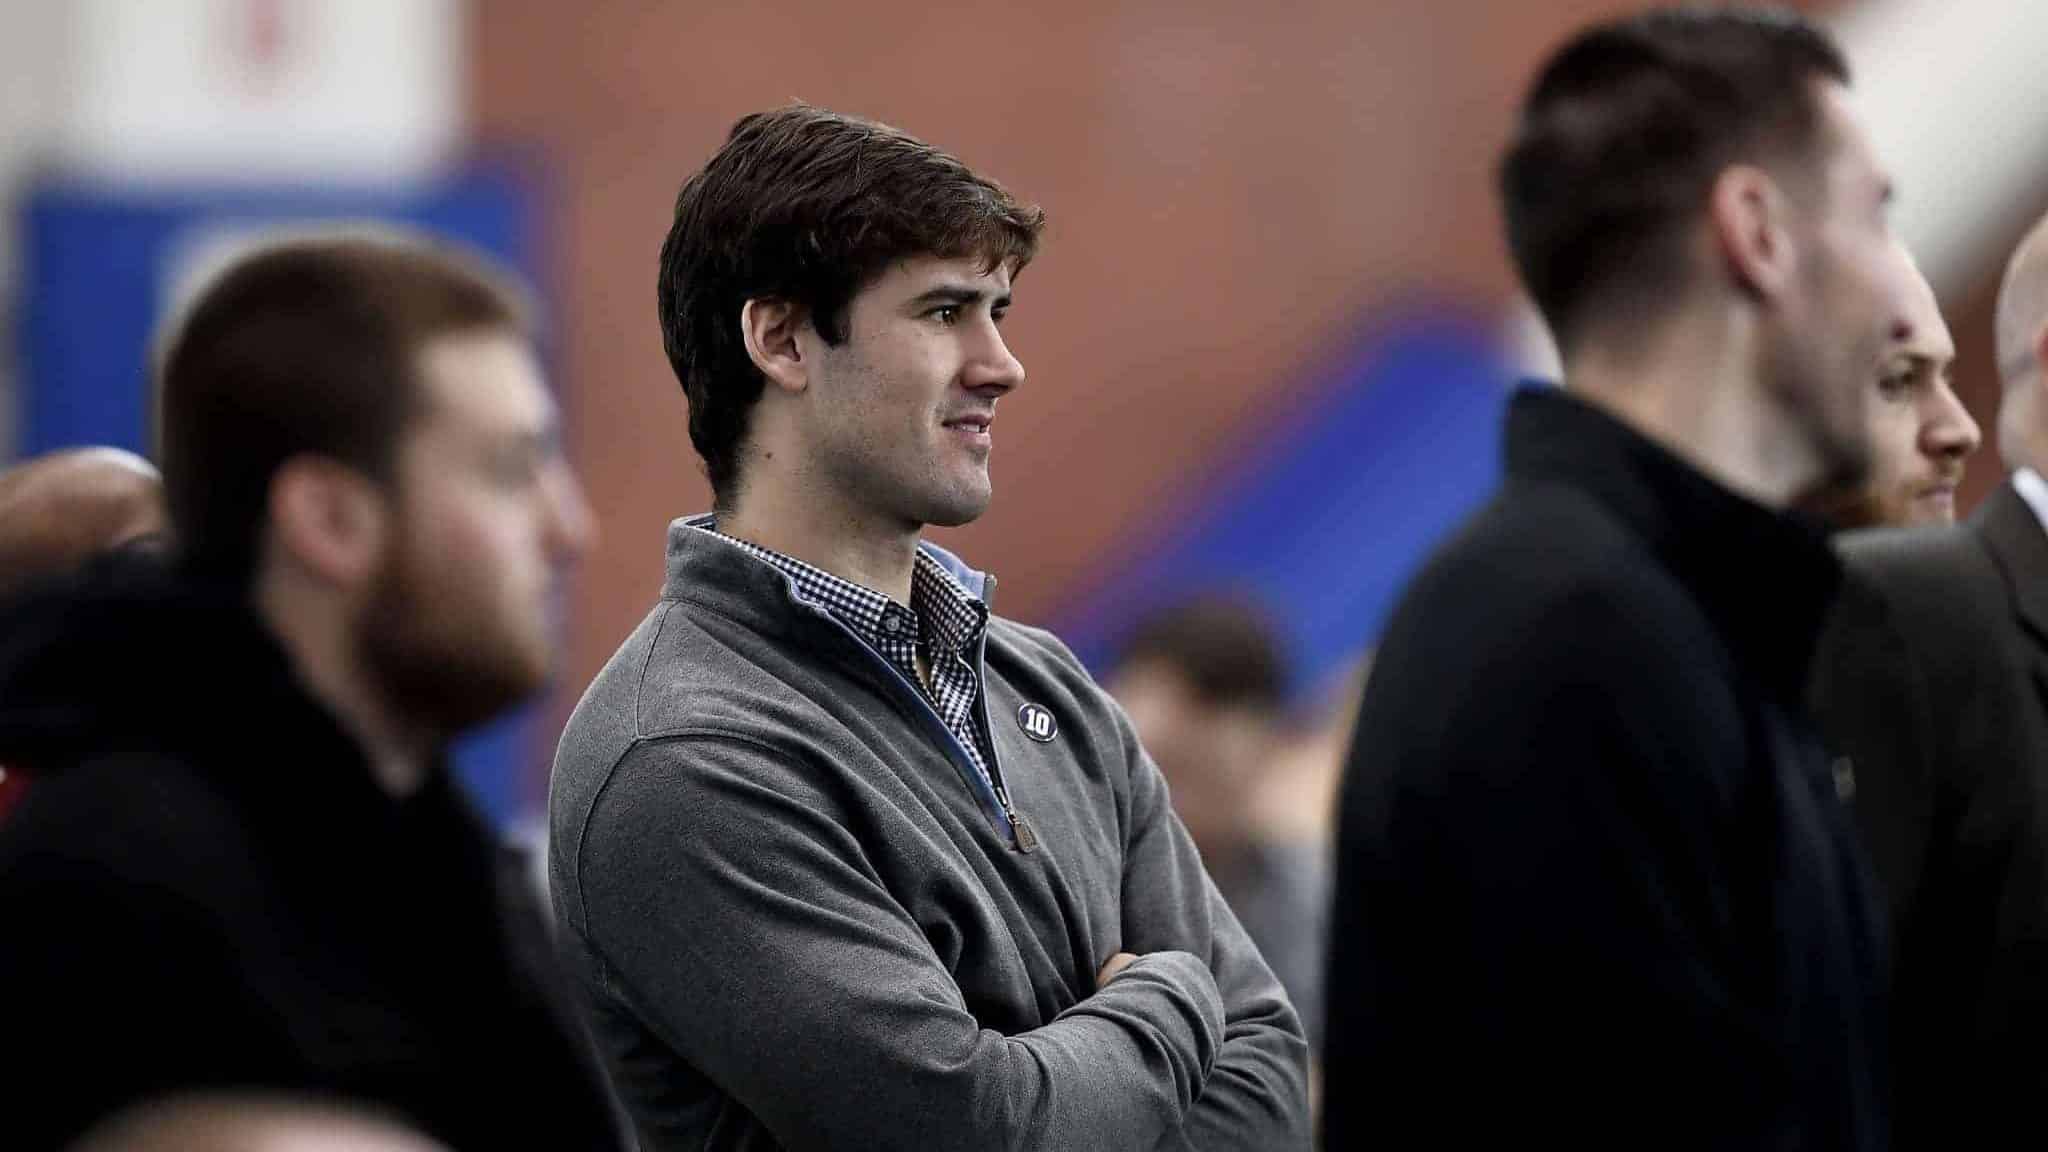 EAST RUTHERFORD, NEW JERSEY - JANUARY 24: New York Giants quarterback Daniel Jones looks on during a press conference for Eli Manning announcing his retirement on January 24, 2020 at Quest Diagnostics Training Center in East Rutherford, New Jersey. The two-time Super Bowl MVP is retiring after 16 seasons with the team.